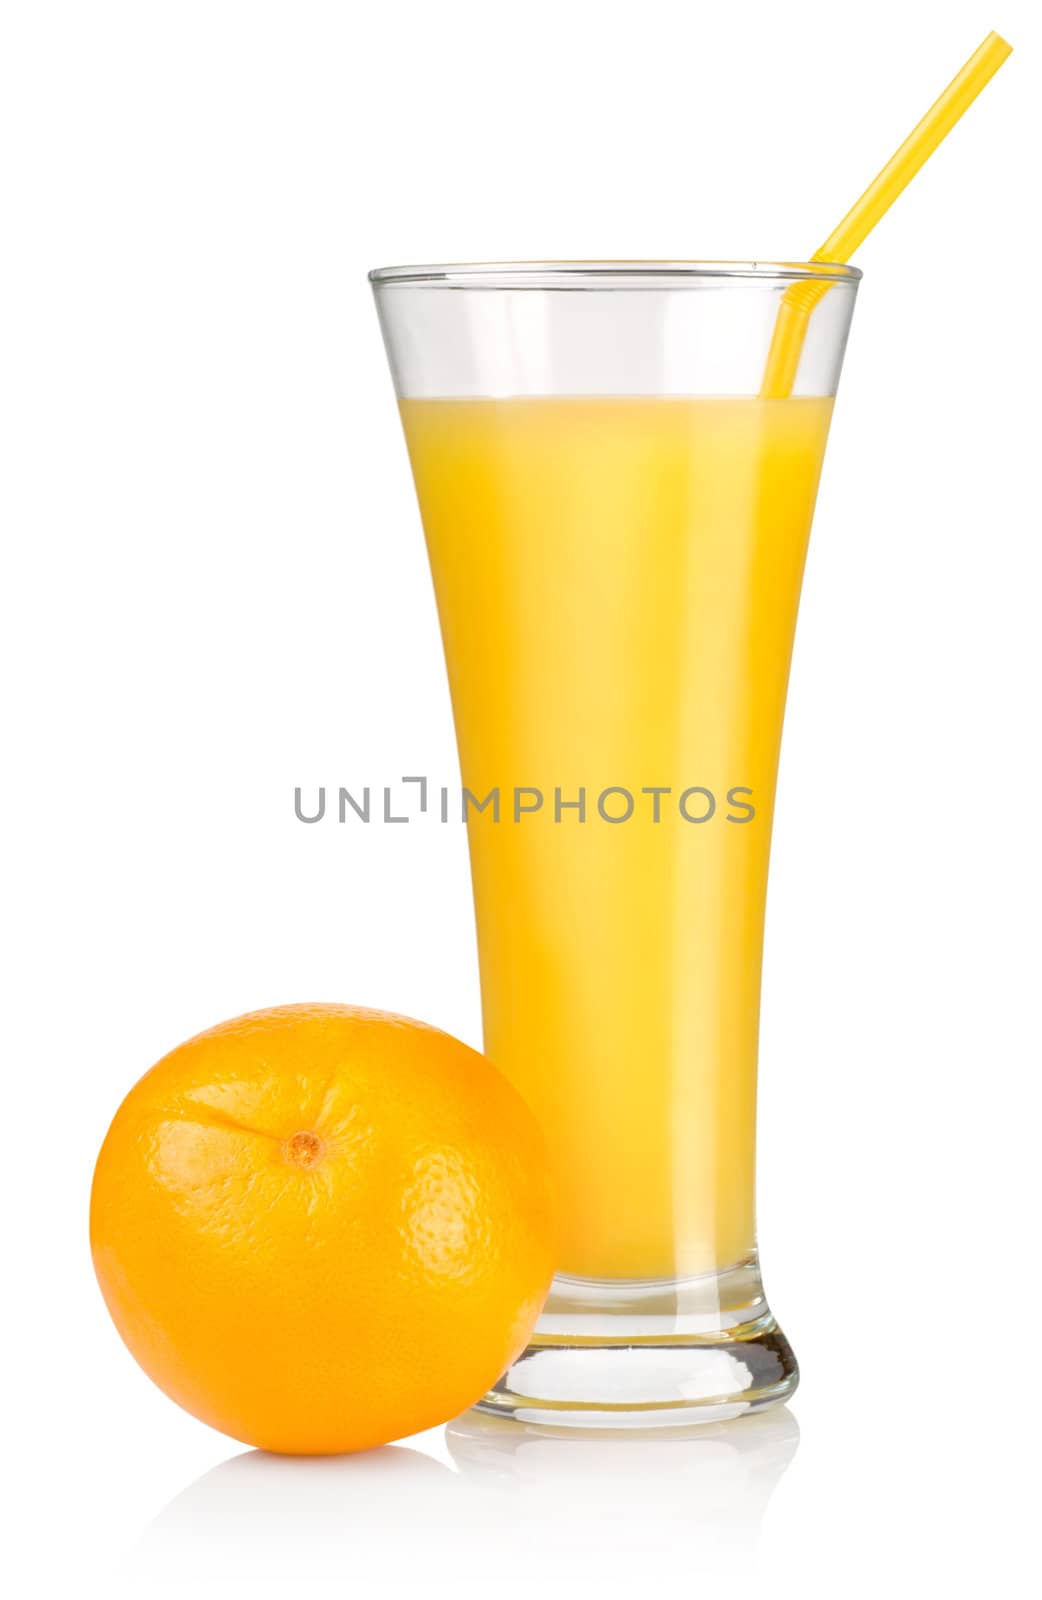 Orange juice in a glass isolated on white background